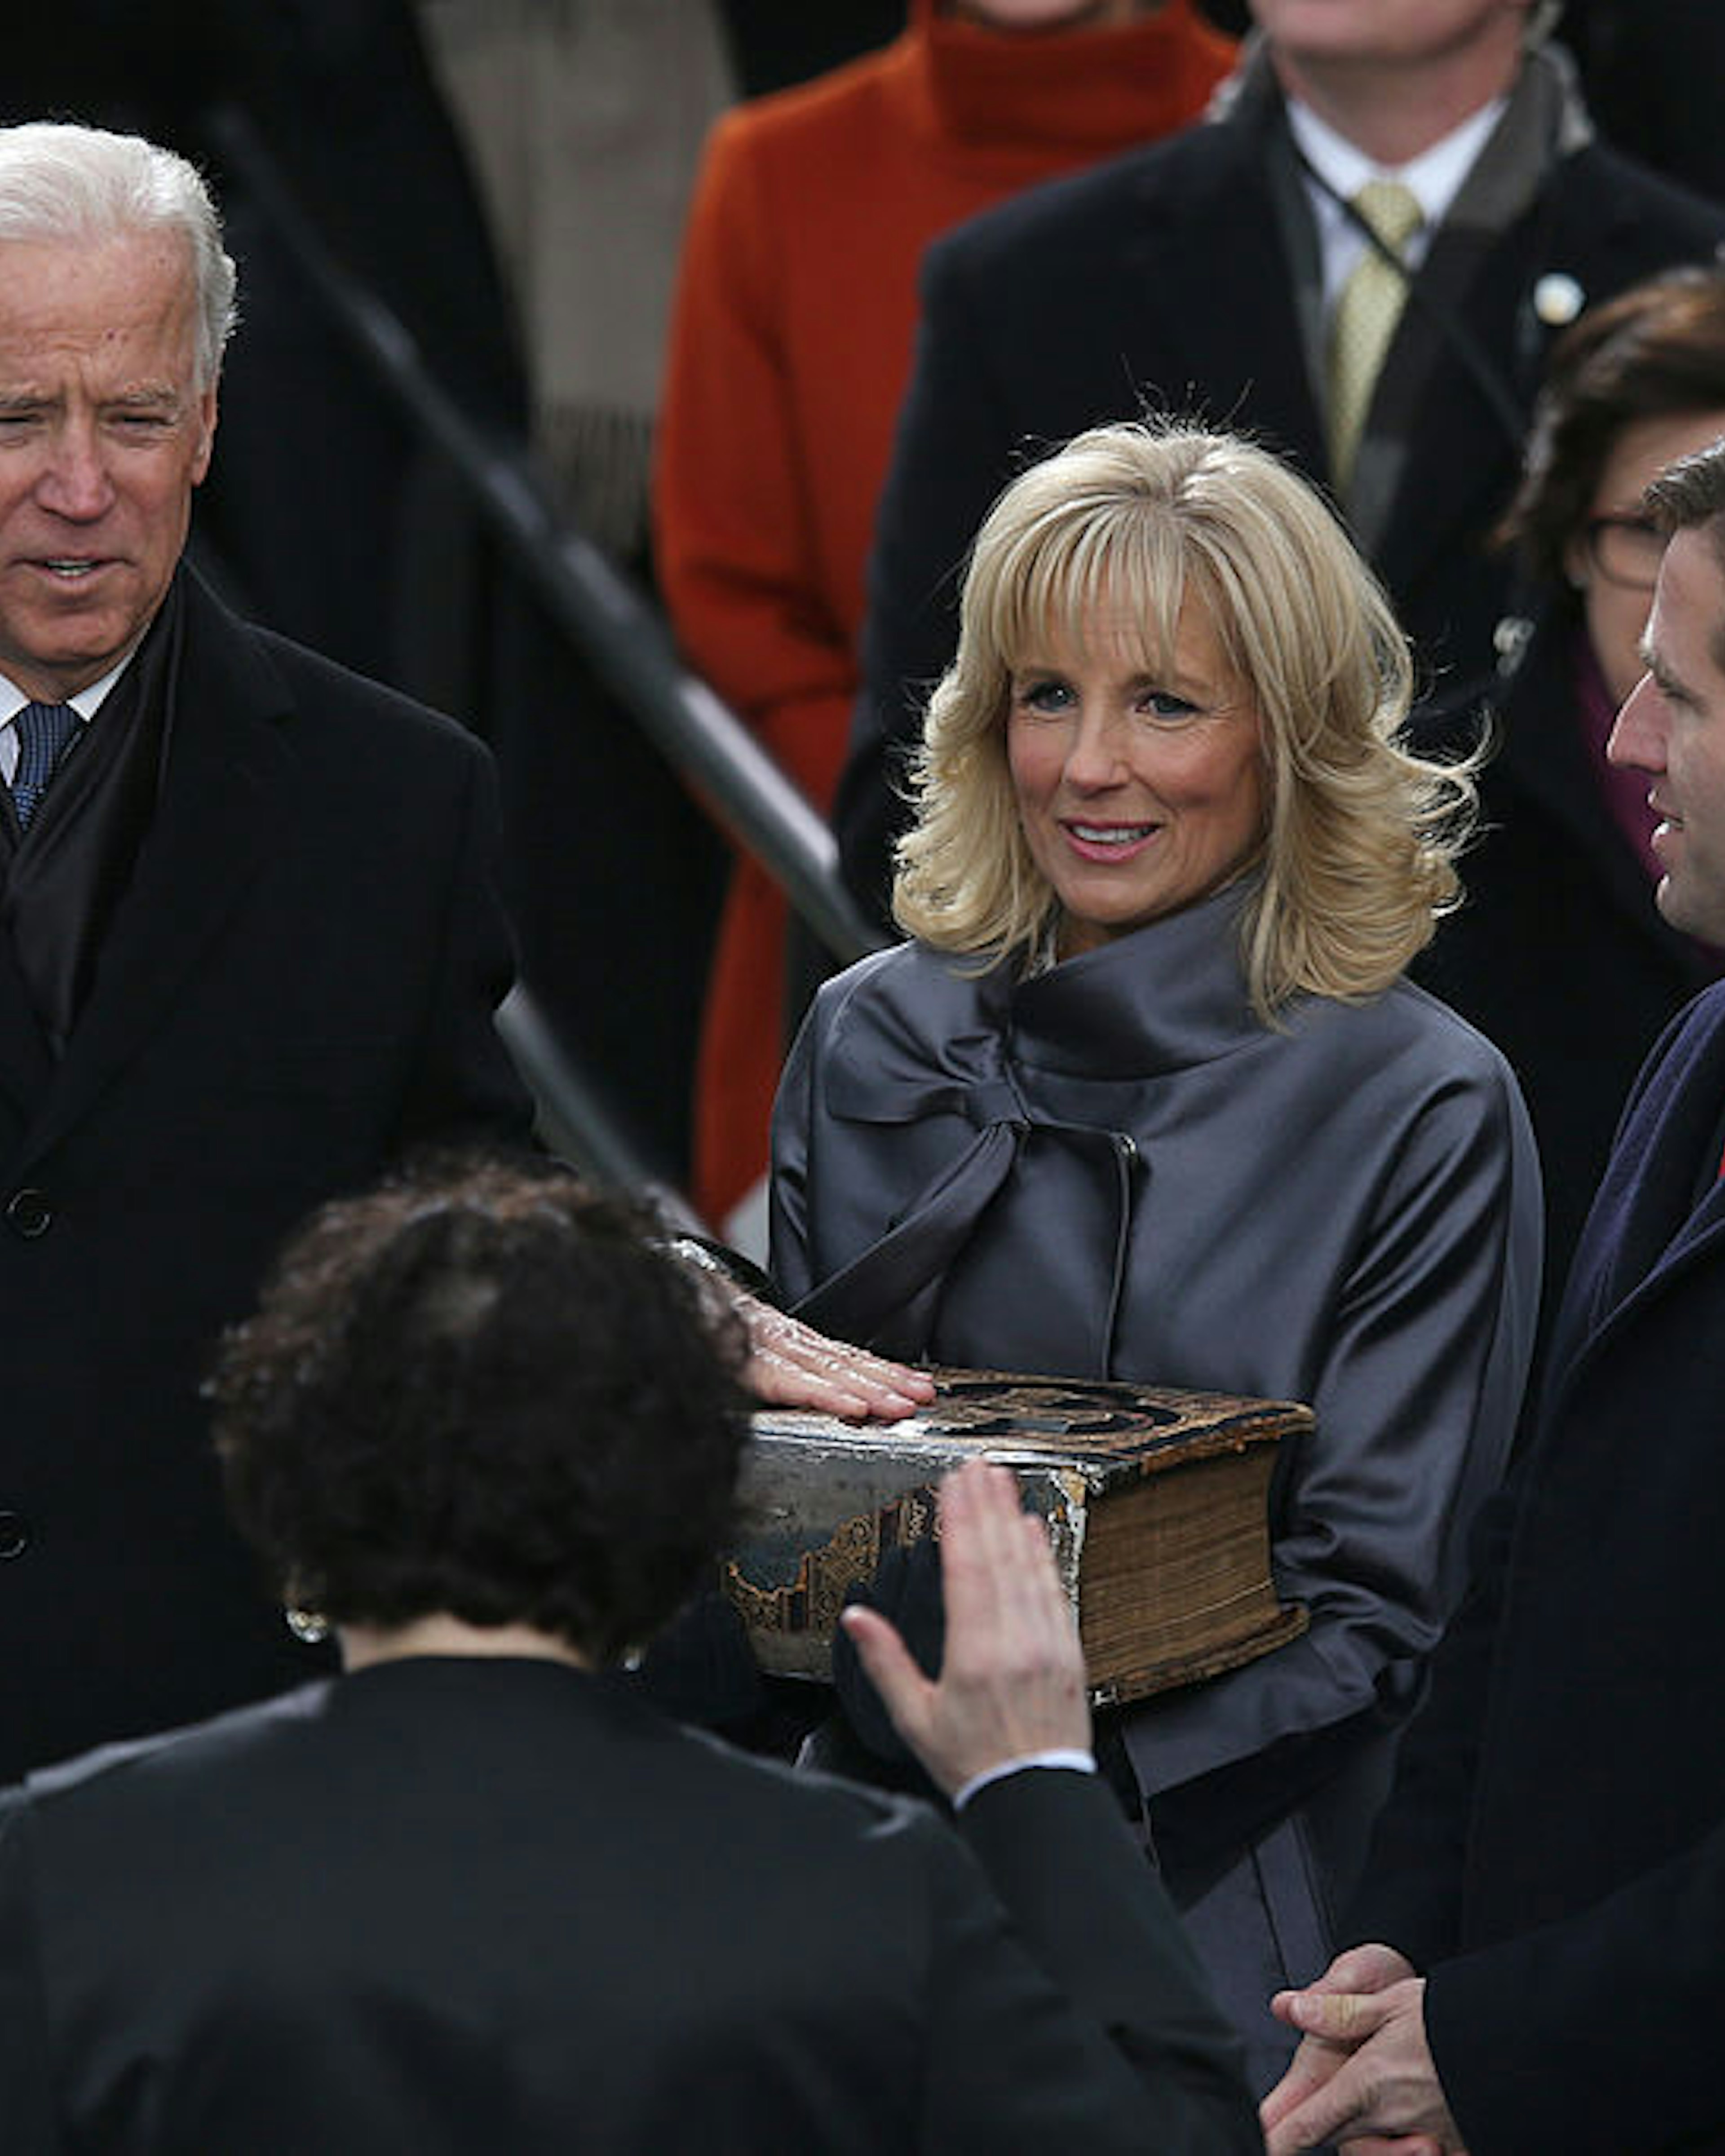 WASHINGTON, DC - JANUARY 21: U.S. Vice President Joe Biden is sworn in by Supreme Court Justice Sonia Sotomayor as wife Dr. Jill Biden and son Beau Biden look on during the presidential inauguration on the West Front of the U.S. Capitol January 21, 2013 in Washington, DC. Barack Obama was re-elected for a second term as President of the United States. (Photo by Mark Wilson/Getty Images)